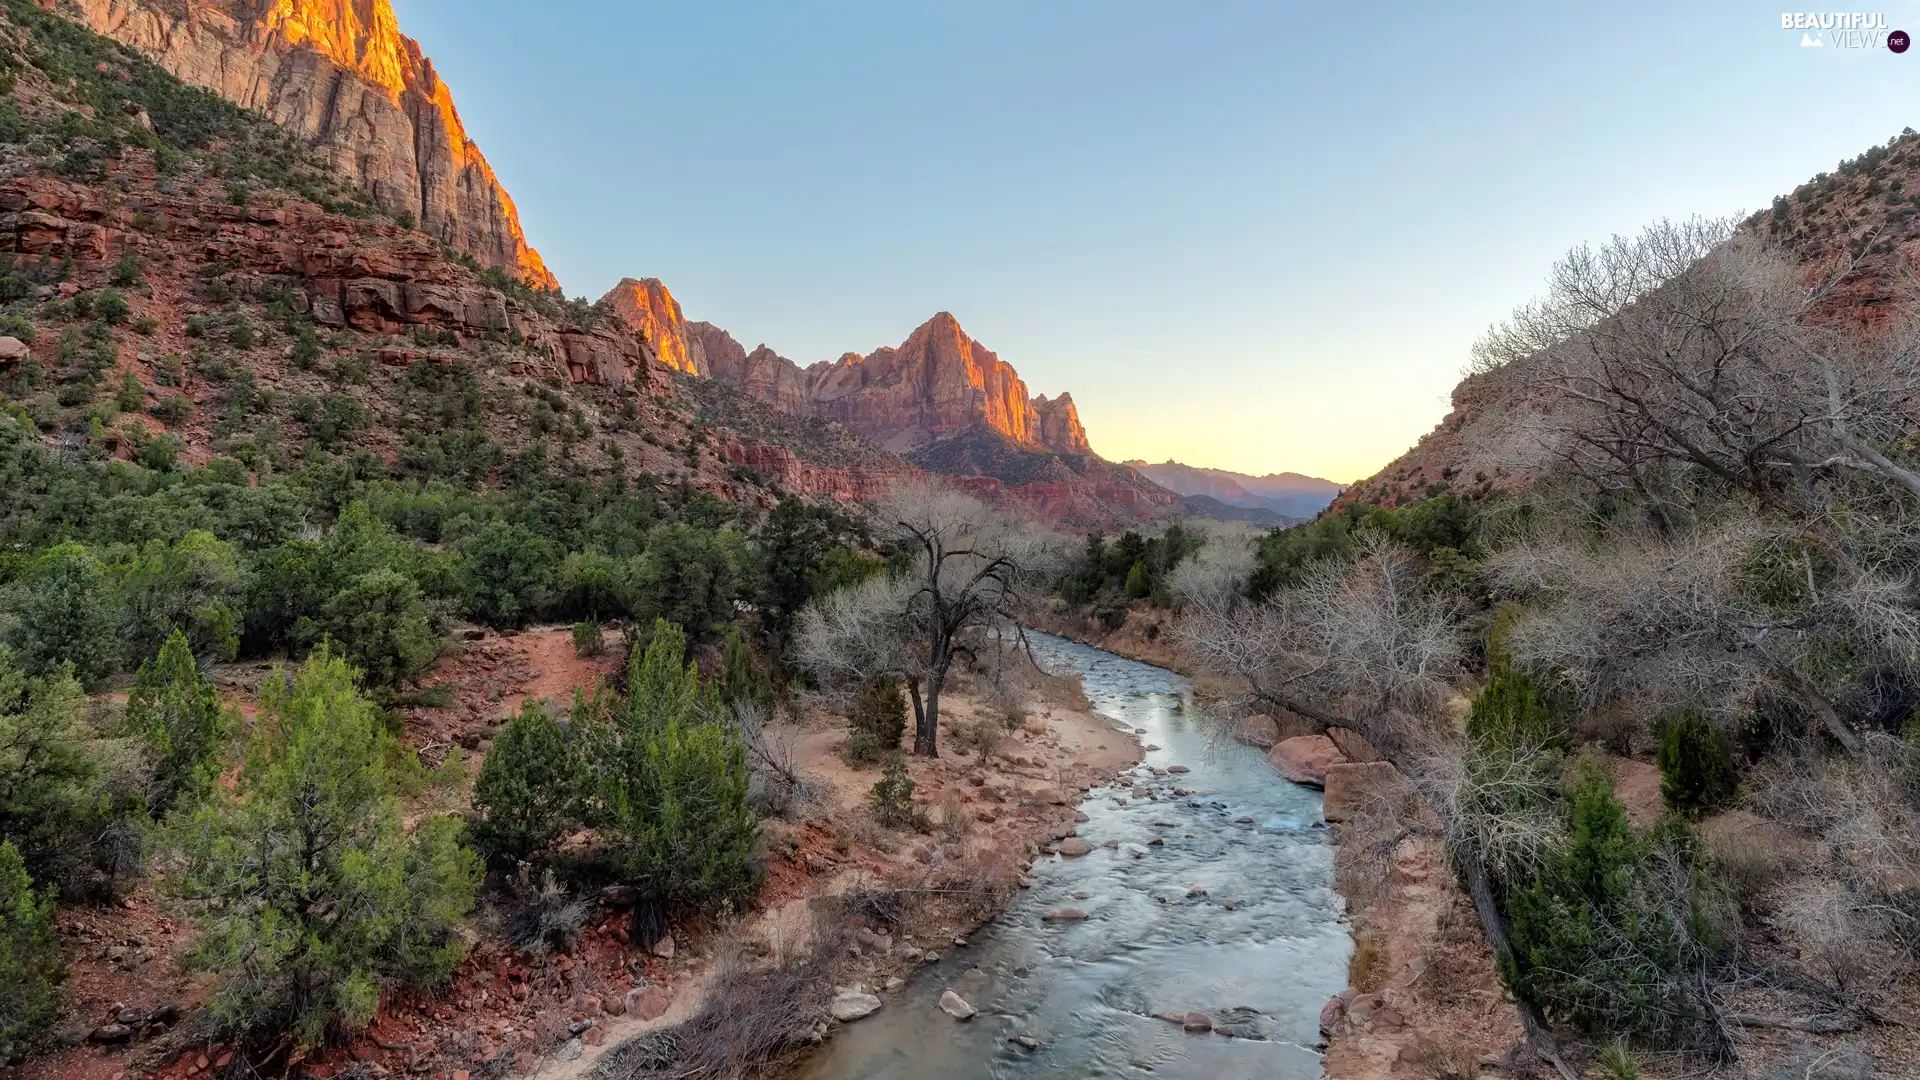 viewes, Watchman Mountains, Utah State, trees, Zion National Park, Virgin River, The United States